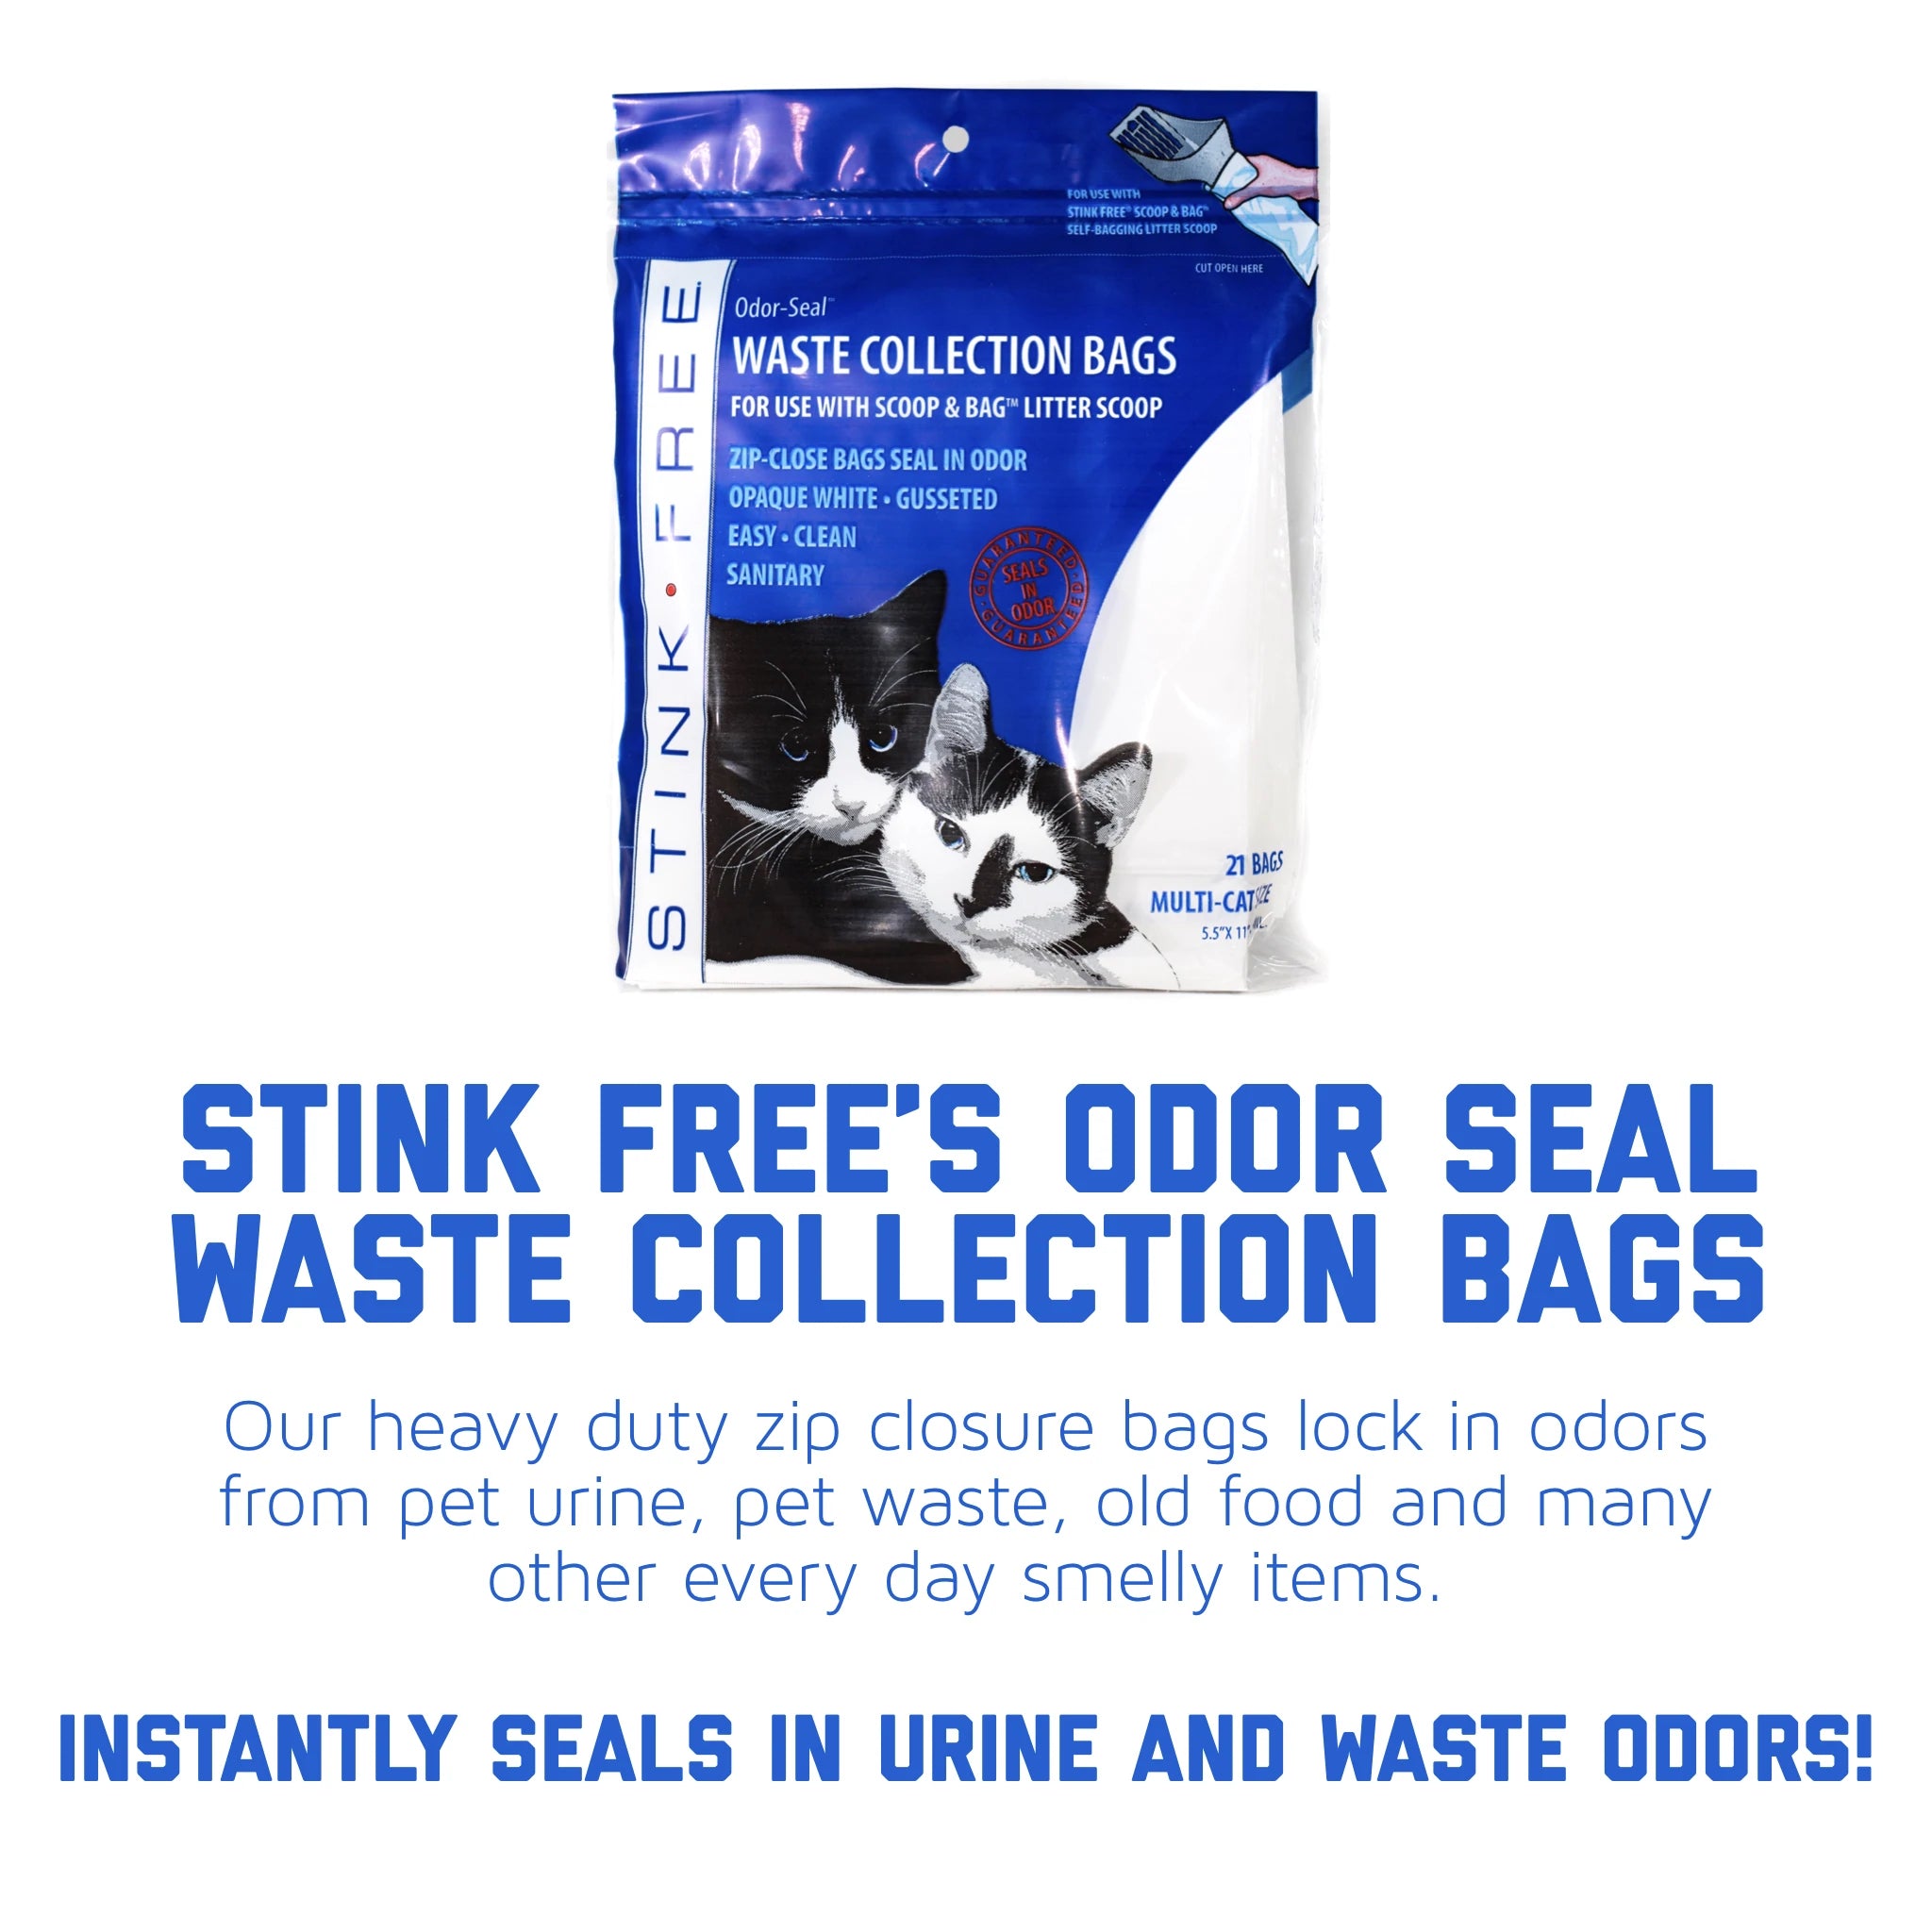 Rainstorm Solid Absorber & Deodorizer with 21 Odor Seal Waste Collection Bags